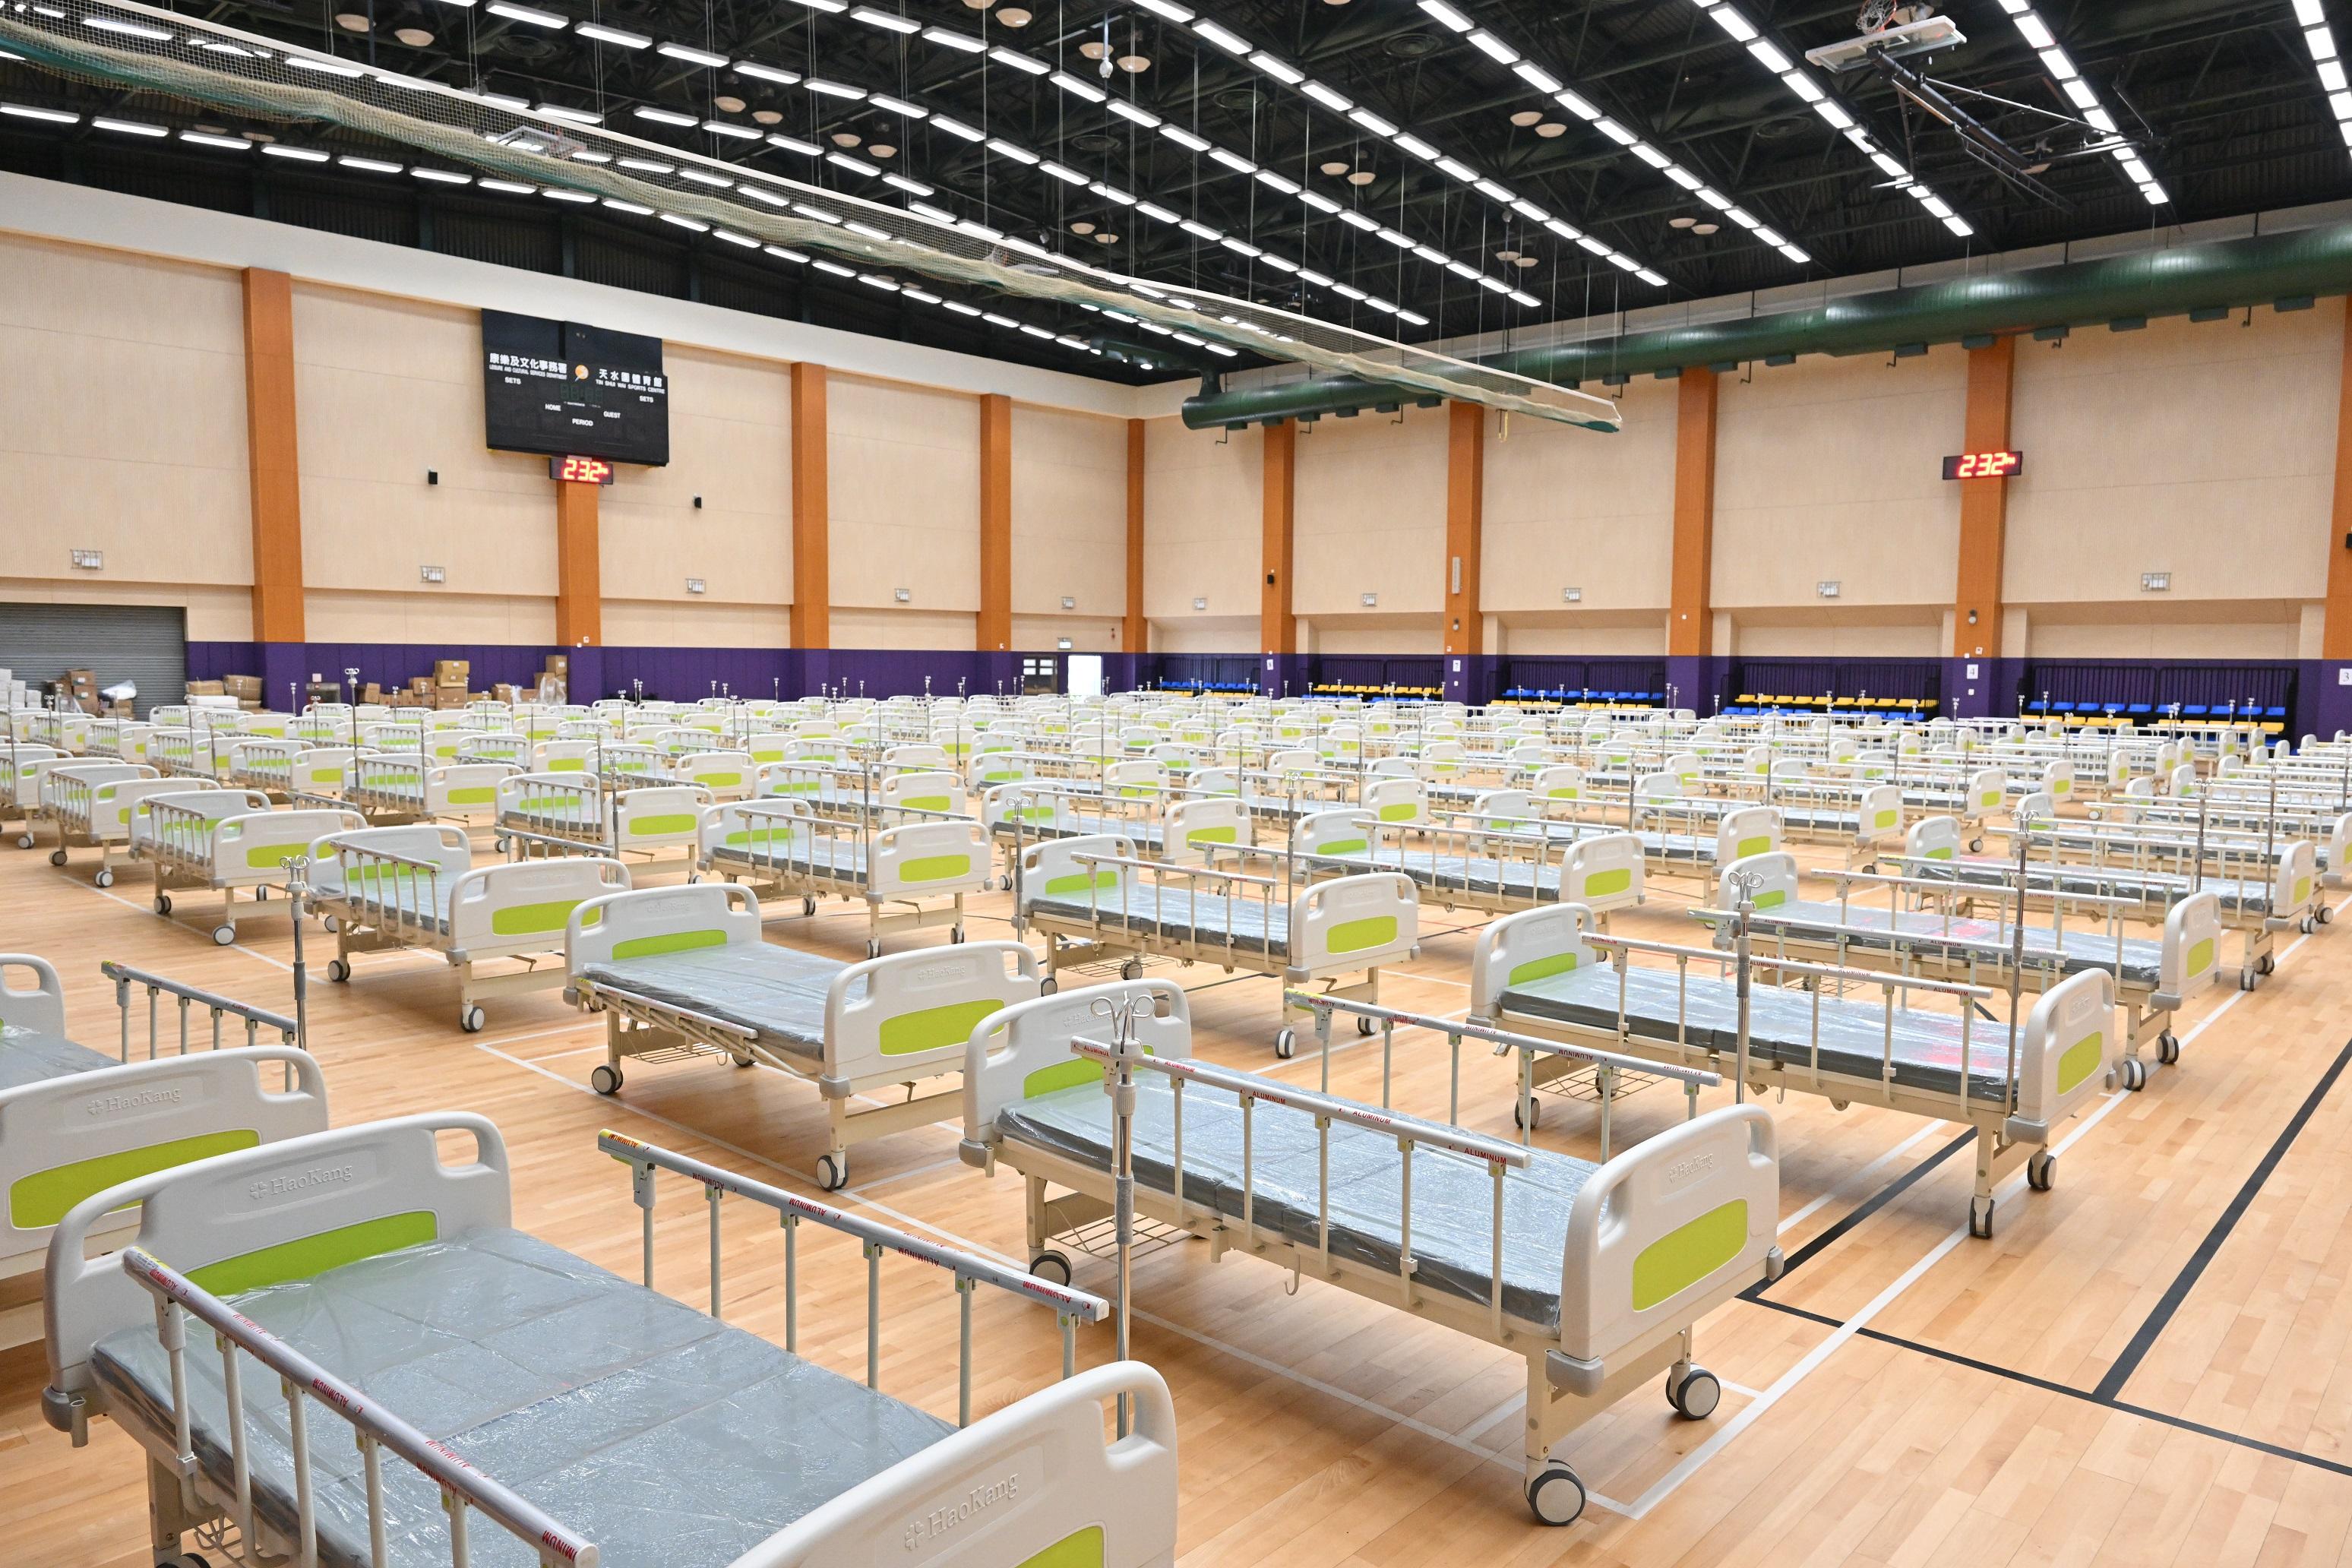 The holding centre at Tin Shui Wai Sports Centre has come into operation today (March 23).